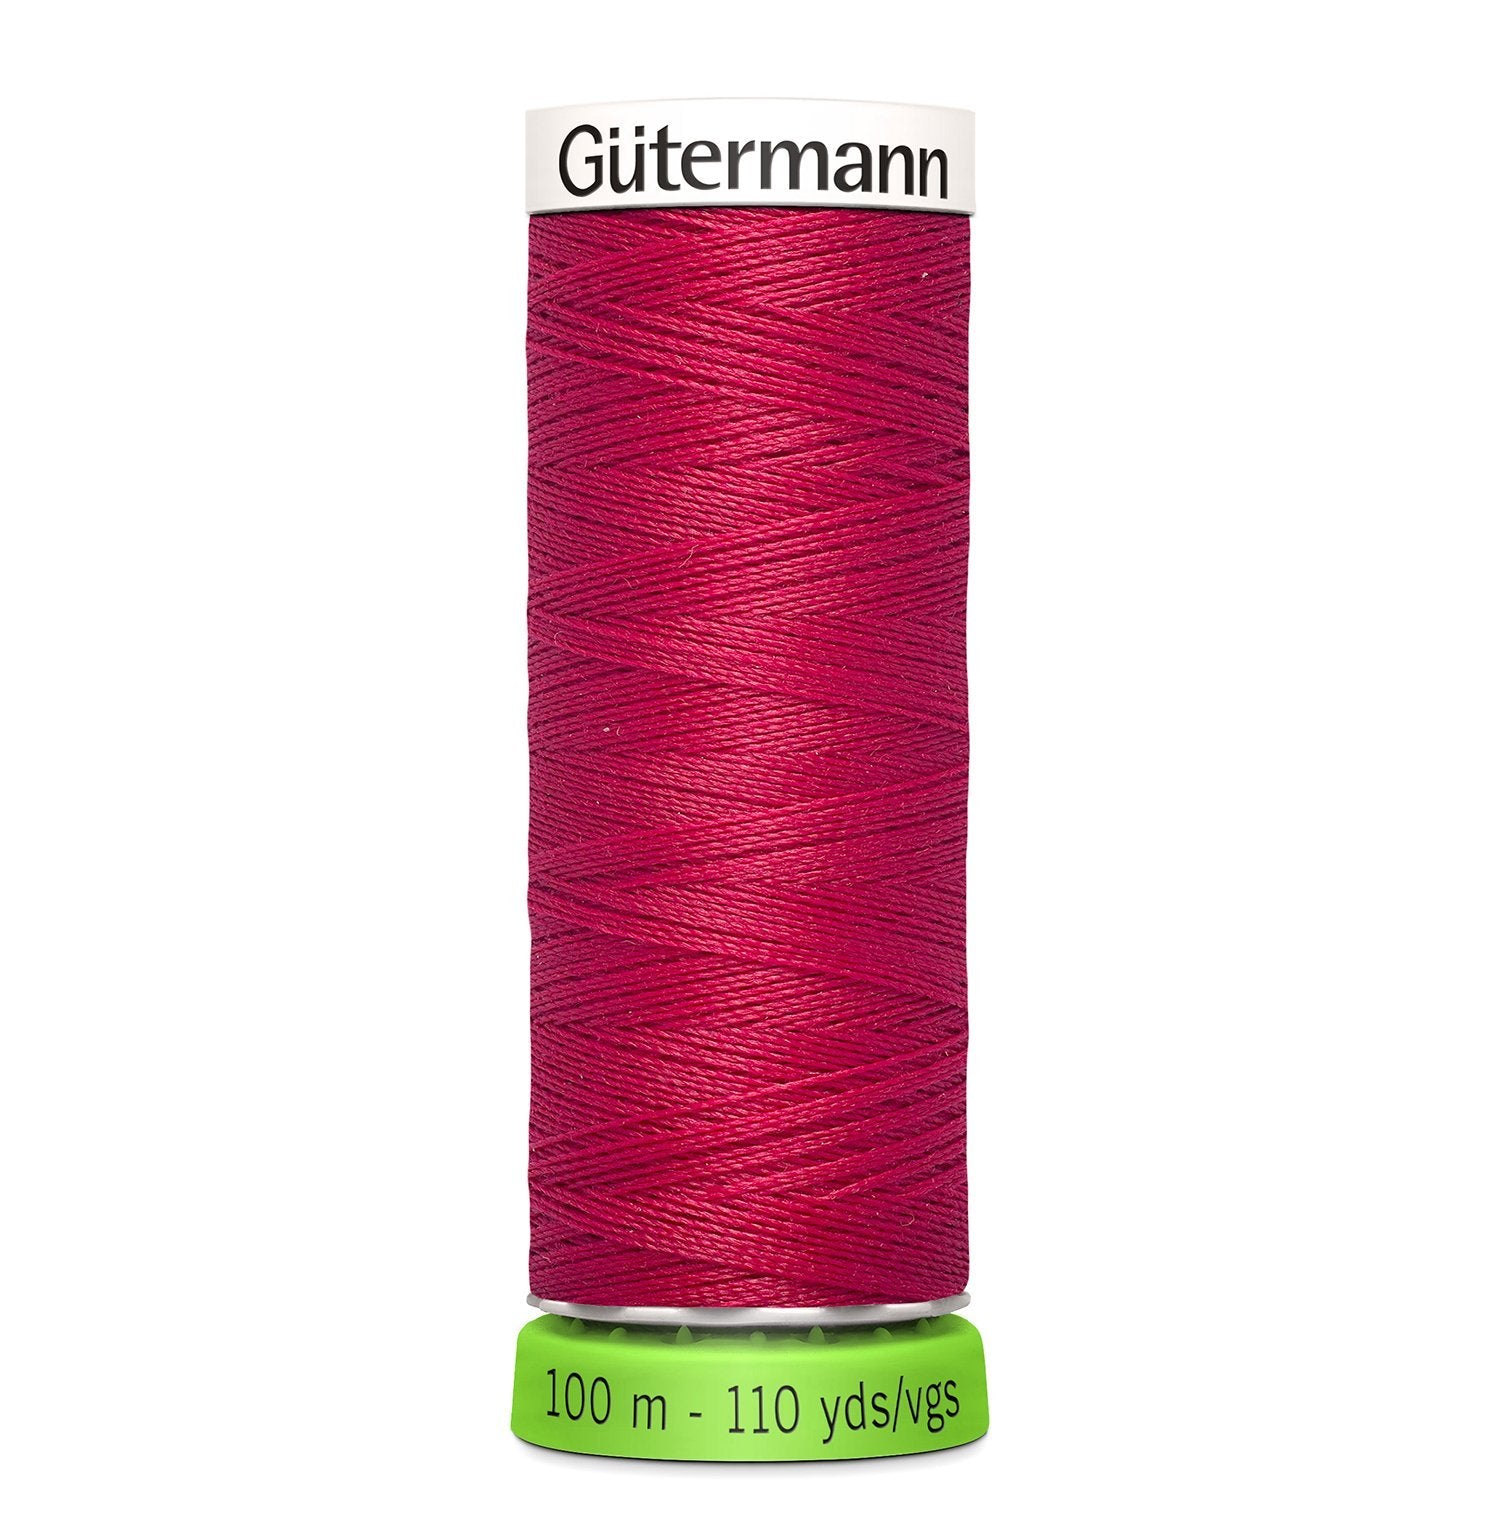 Gutermann Recycled Thread 100m, Colour 909 from Jaycotts Sewing Supplies